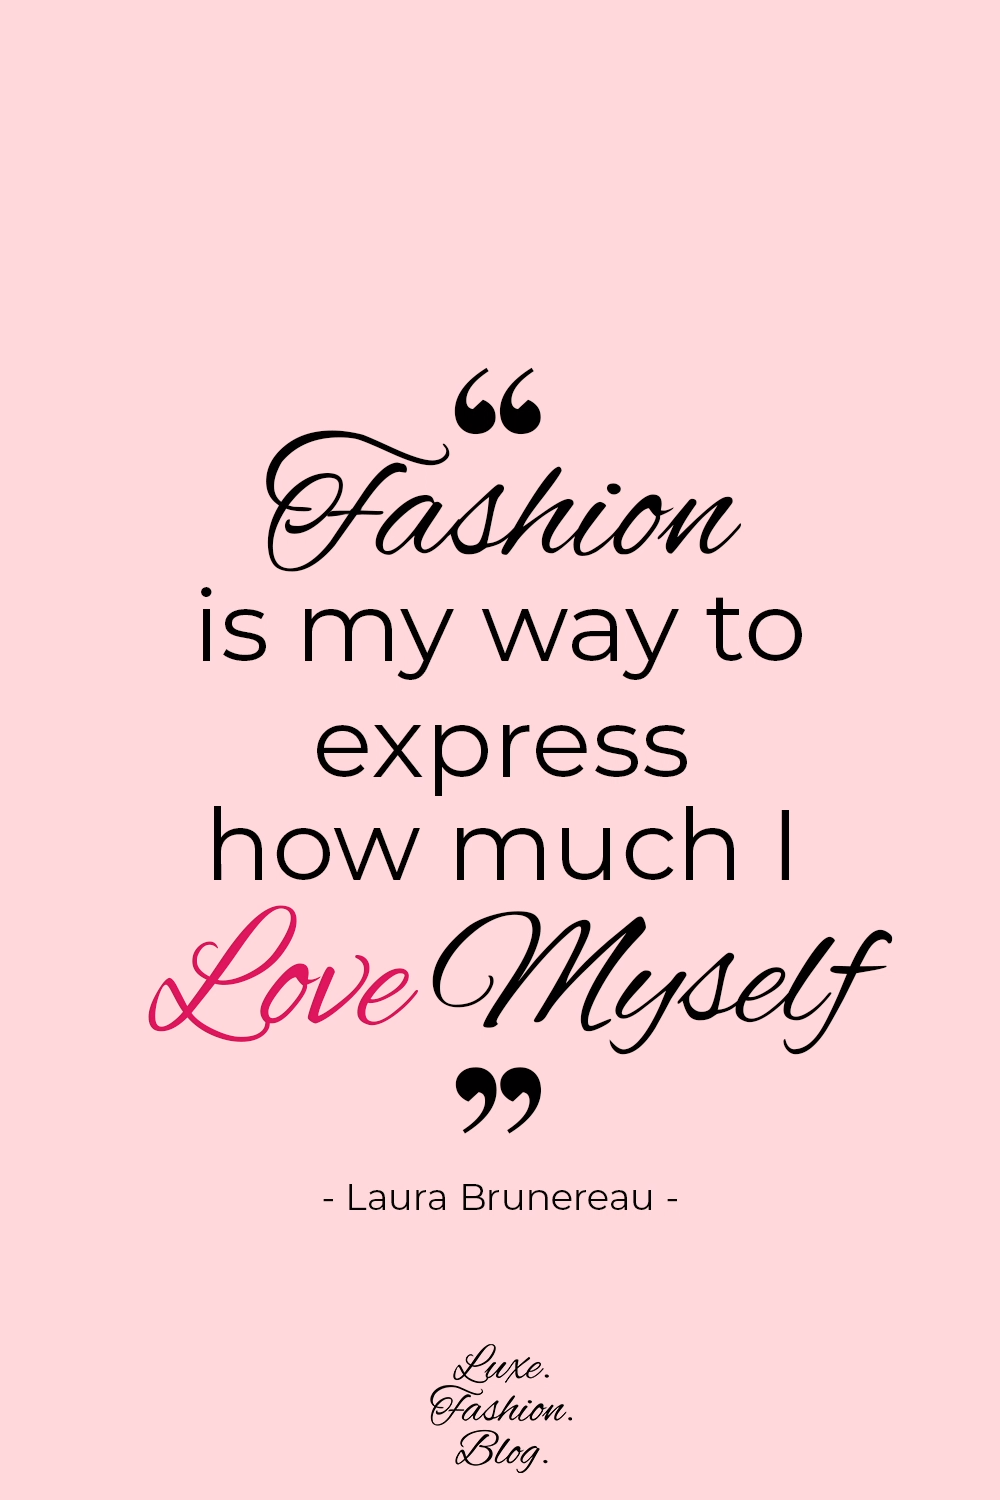 Love for Fashion Quotes - St. Valentine's Day | Quotes Self Love | LuxeFashionBlog.com - Love for Fashion Quotes - St. Valentine's Day | Quotes Self Love | LuxeFashionBlog.com -   18 interior style Quotes ideas